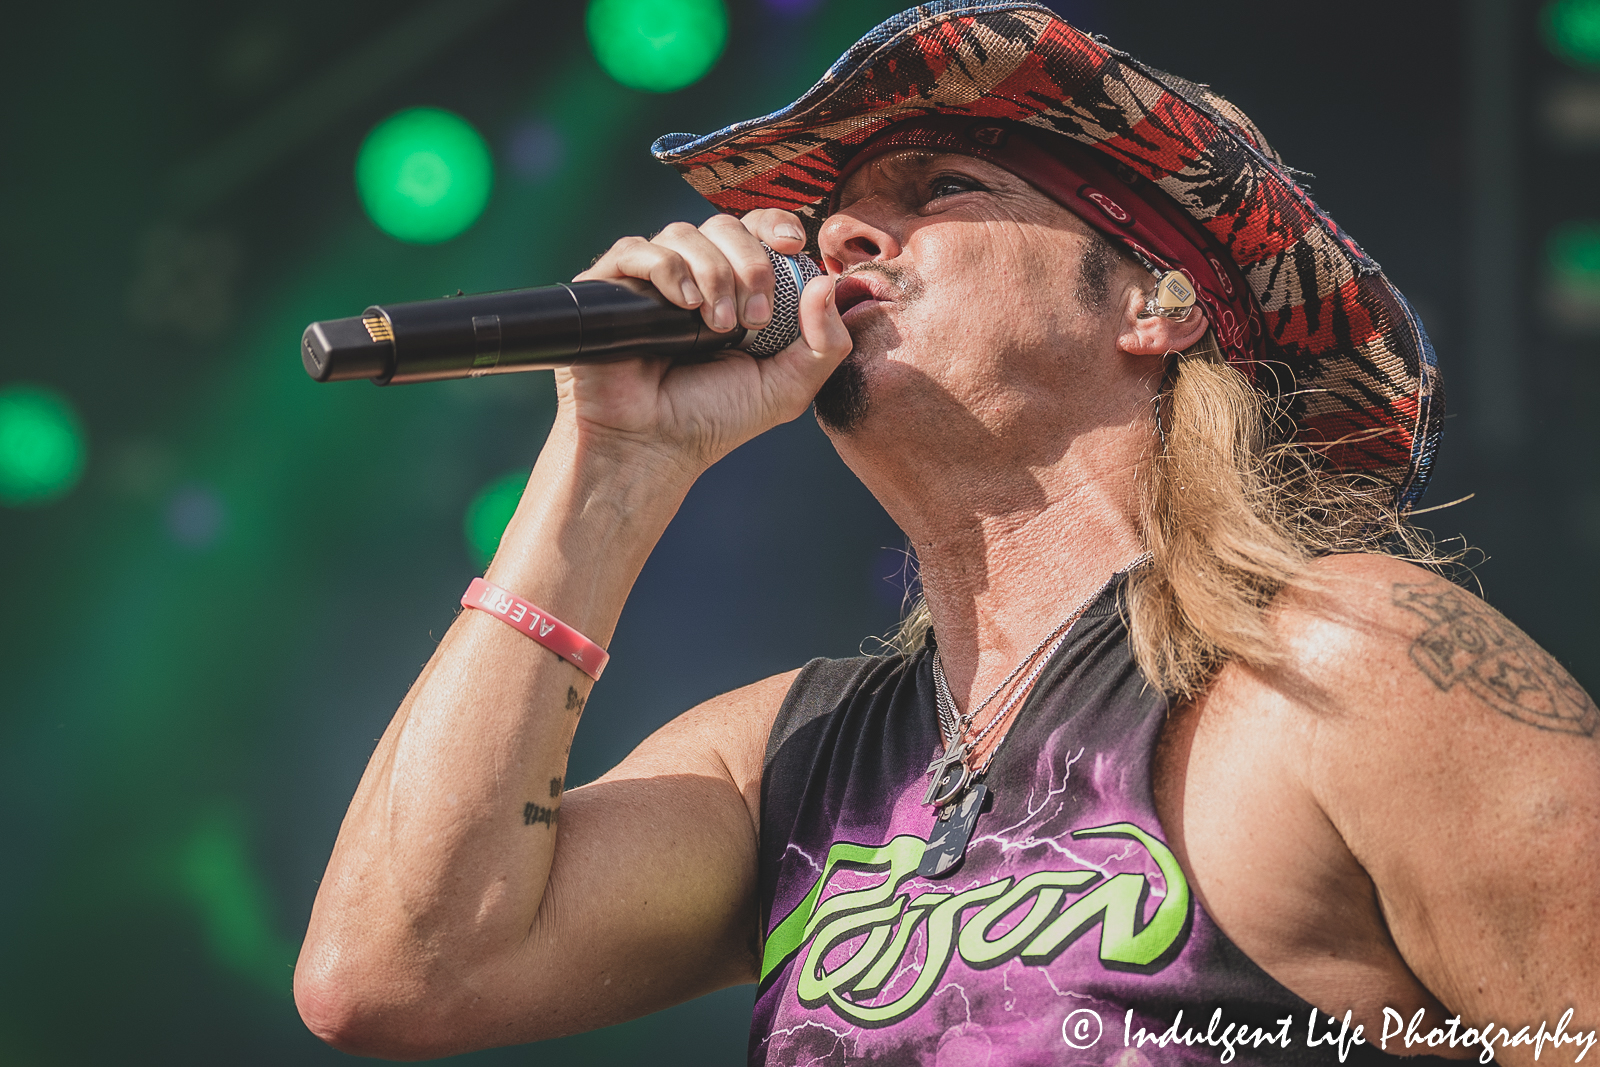 Lead singer Bret Michaels of Poison singing "Look What the Cat Dragged In" during the stadium tour stop at Kauffman Stadium in Kansas City, MO on July 19, 2022.